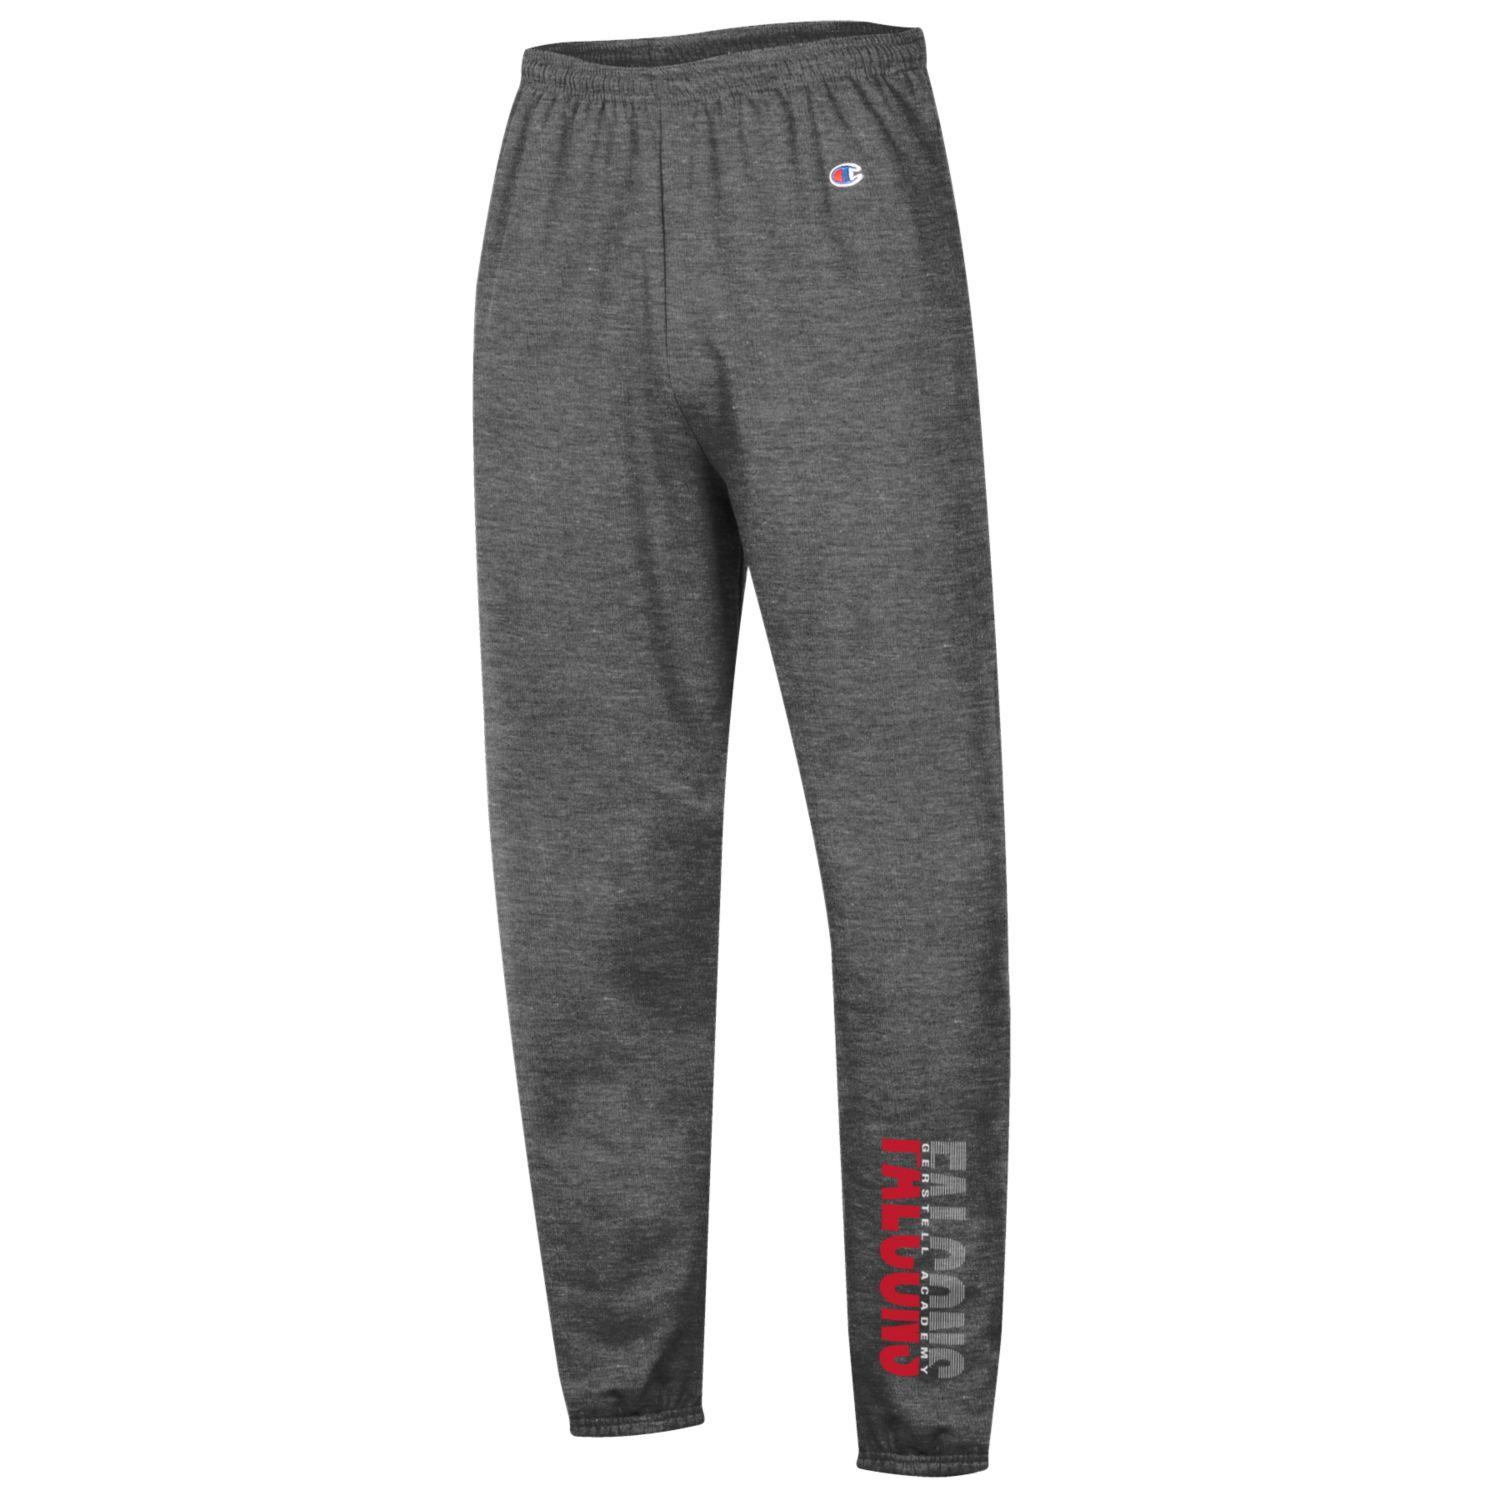 Champion Powerblend Banded Bottom Pant - Heather Grey